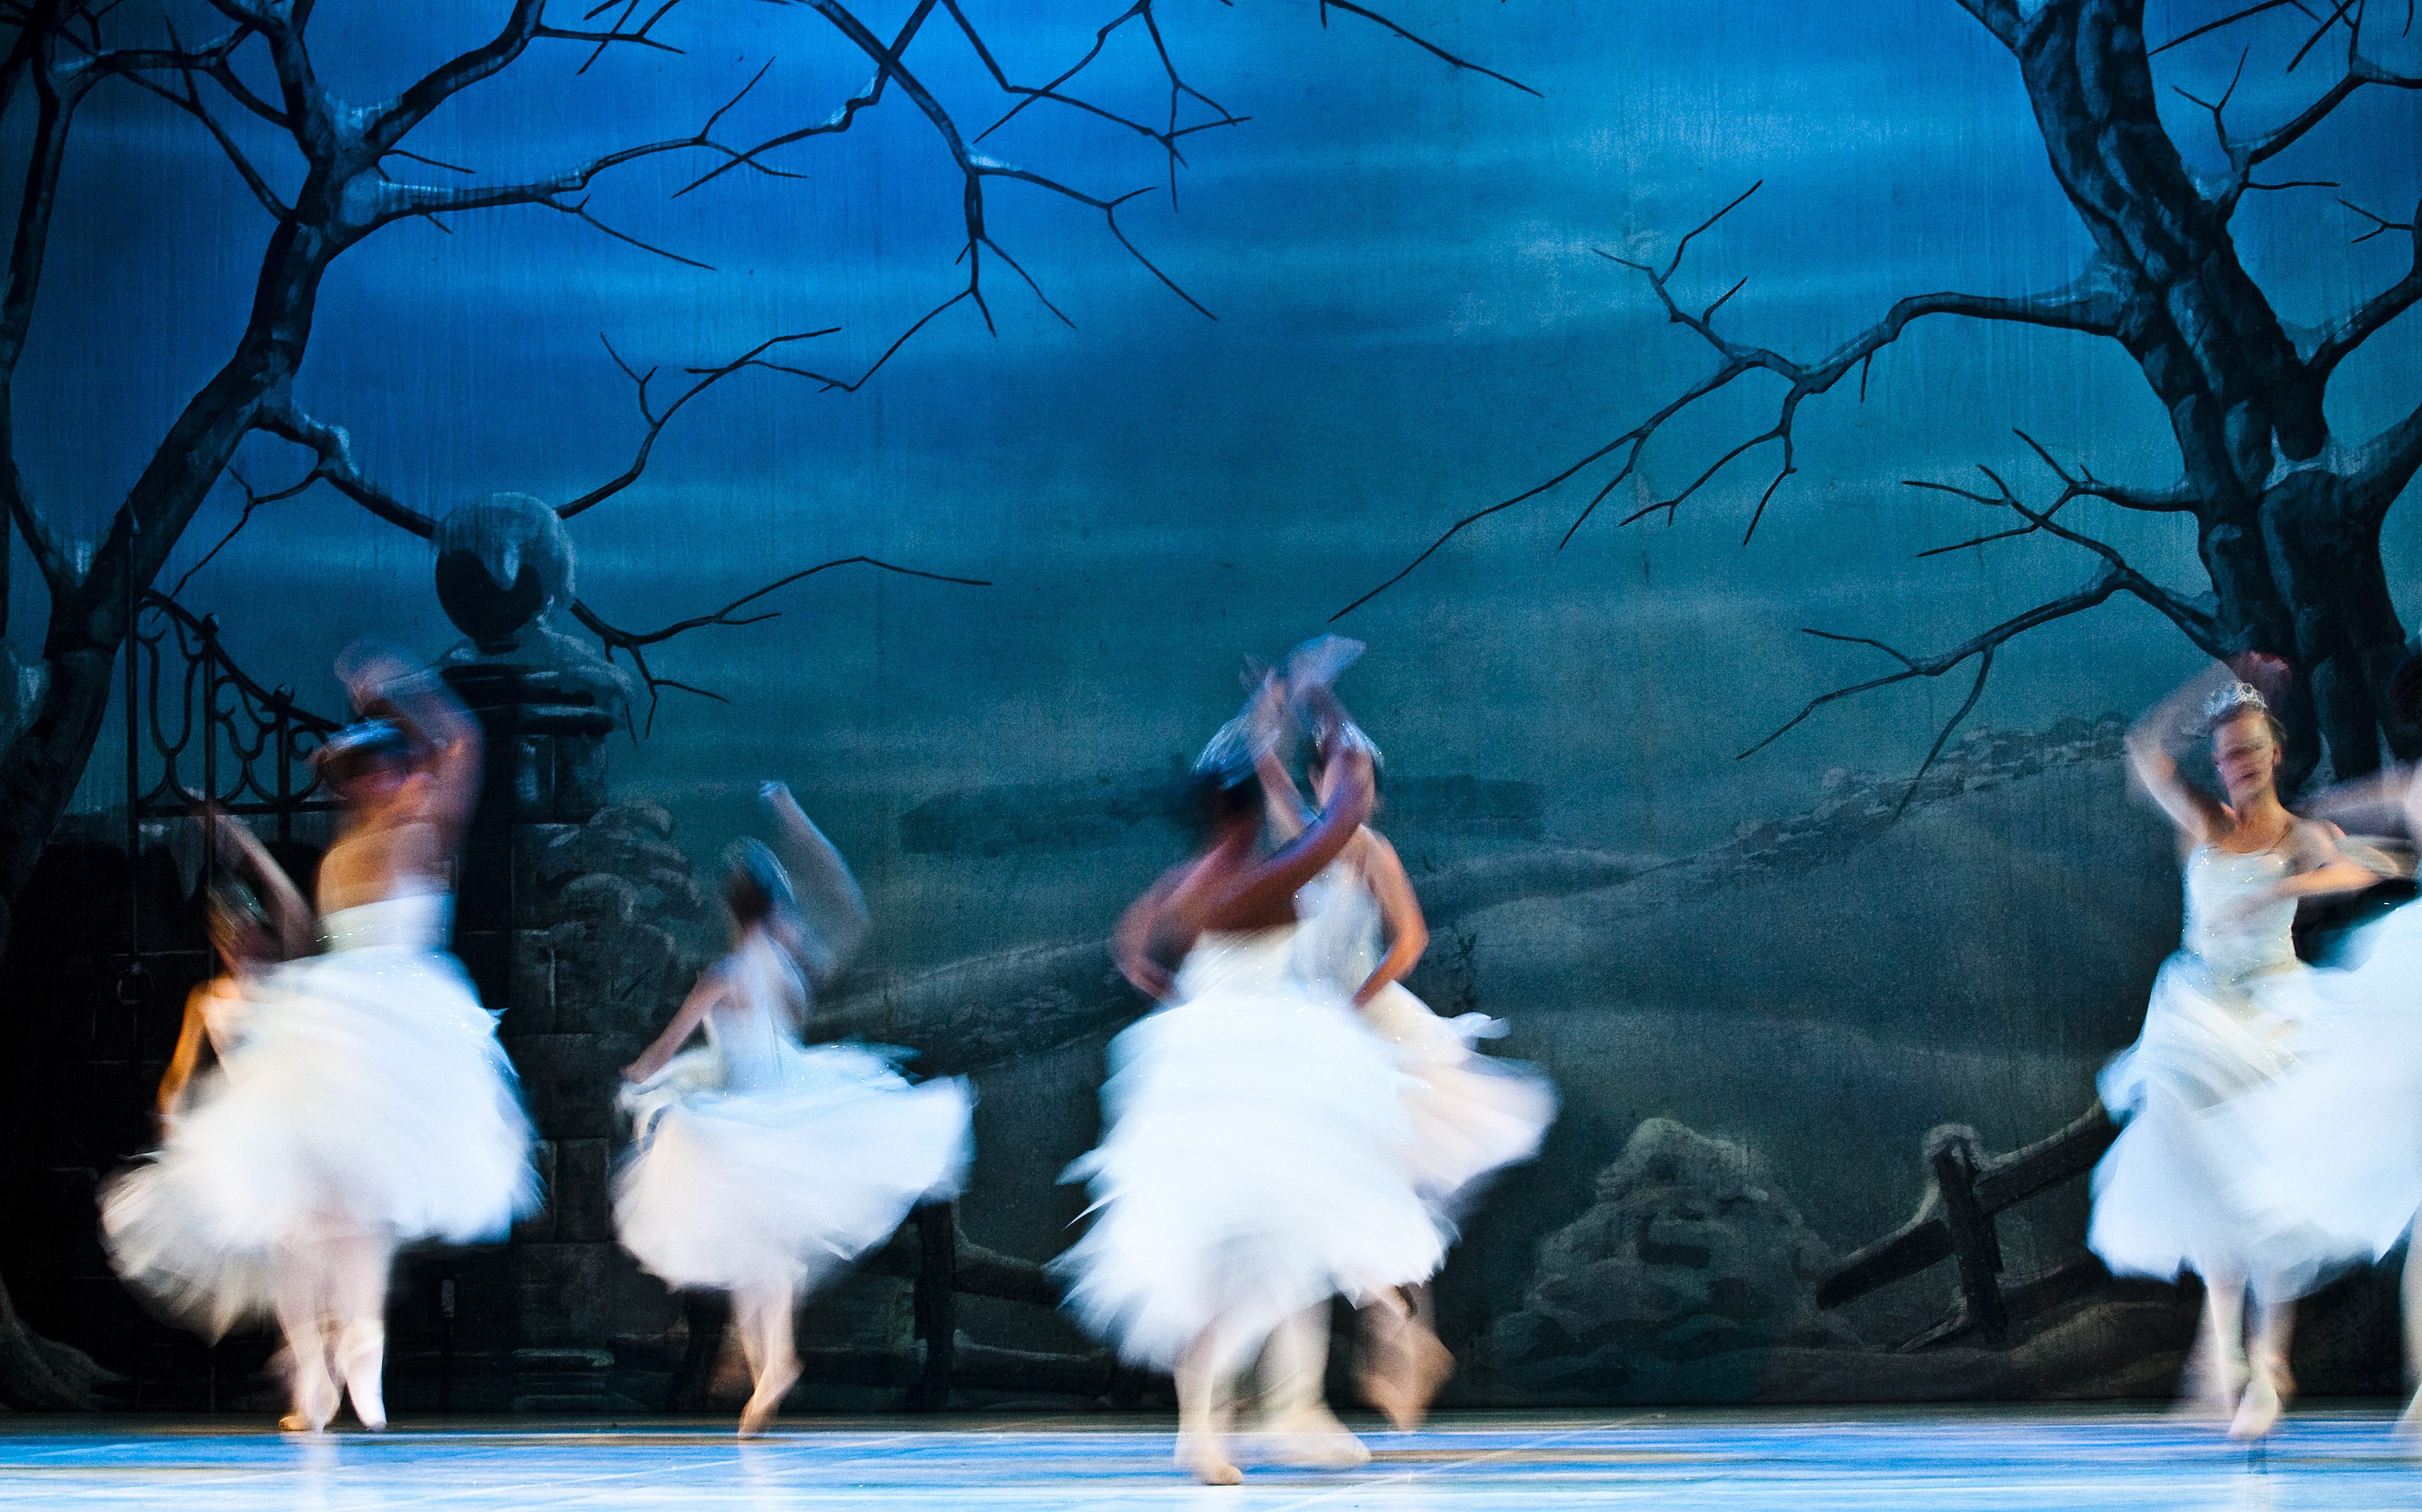 PRETORIA, SOUTH AFRICA - 20 November 2009: Ballet dancers from the Youth Dance Company of Tshwane perform in the ballet, The Nutcracker at the Pretoria State Theater. (Photo by Gallo Images/Foto24/Theana Calitz)